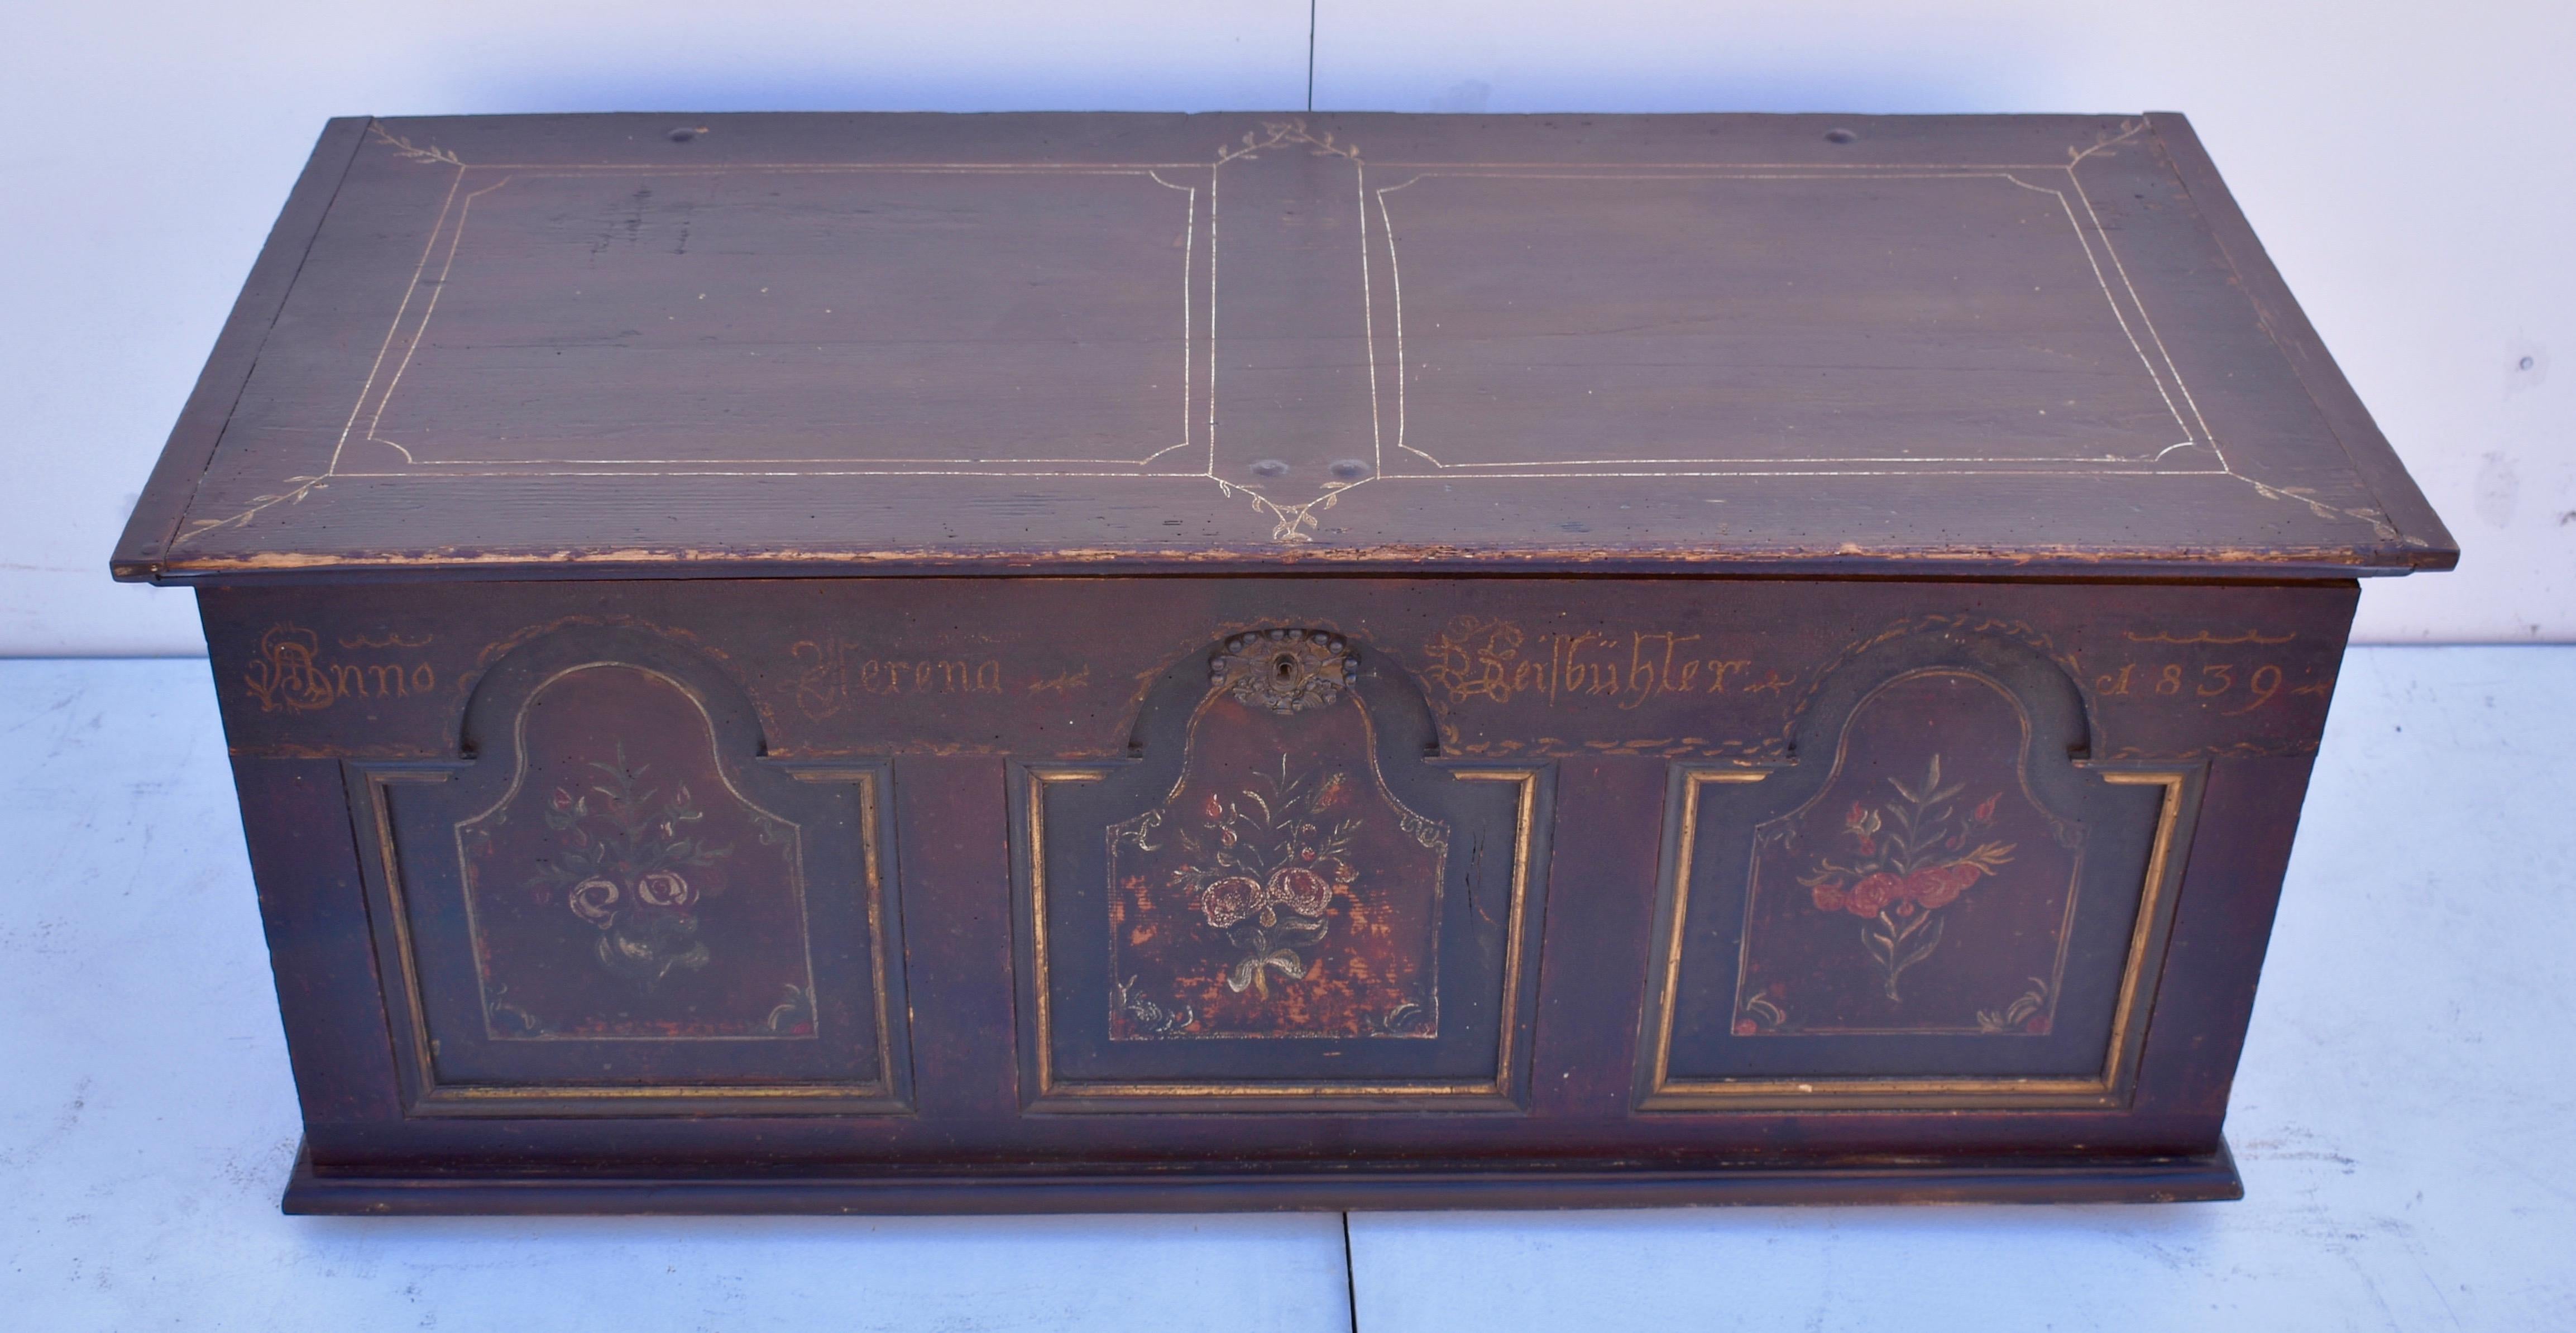 What an outstanding blanket chest! Its painted background is a barn red on which an old varnish has bubbled, crackled and separated to create a beautiful speckled surface. The top and sides have horizontal waves of red and near-black with linear